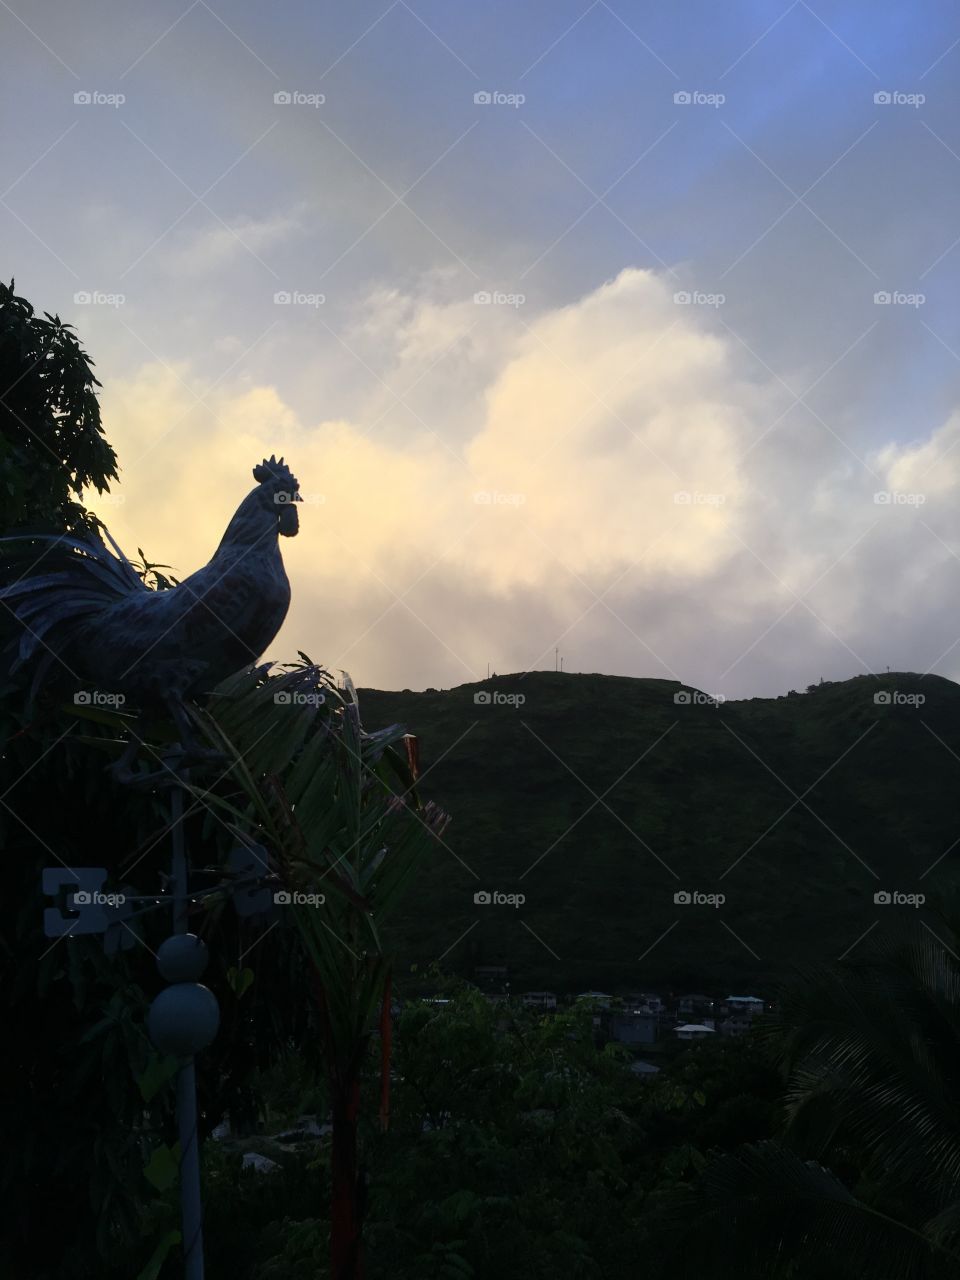 Chicken in front of sunset with mountains in background 